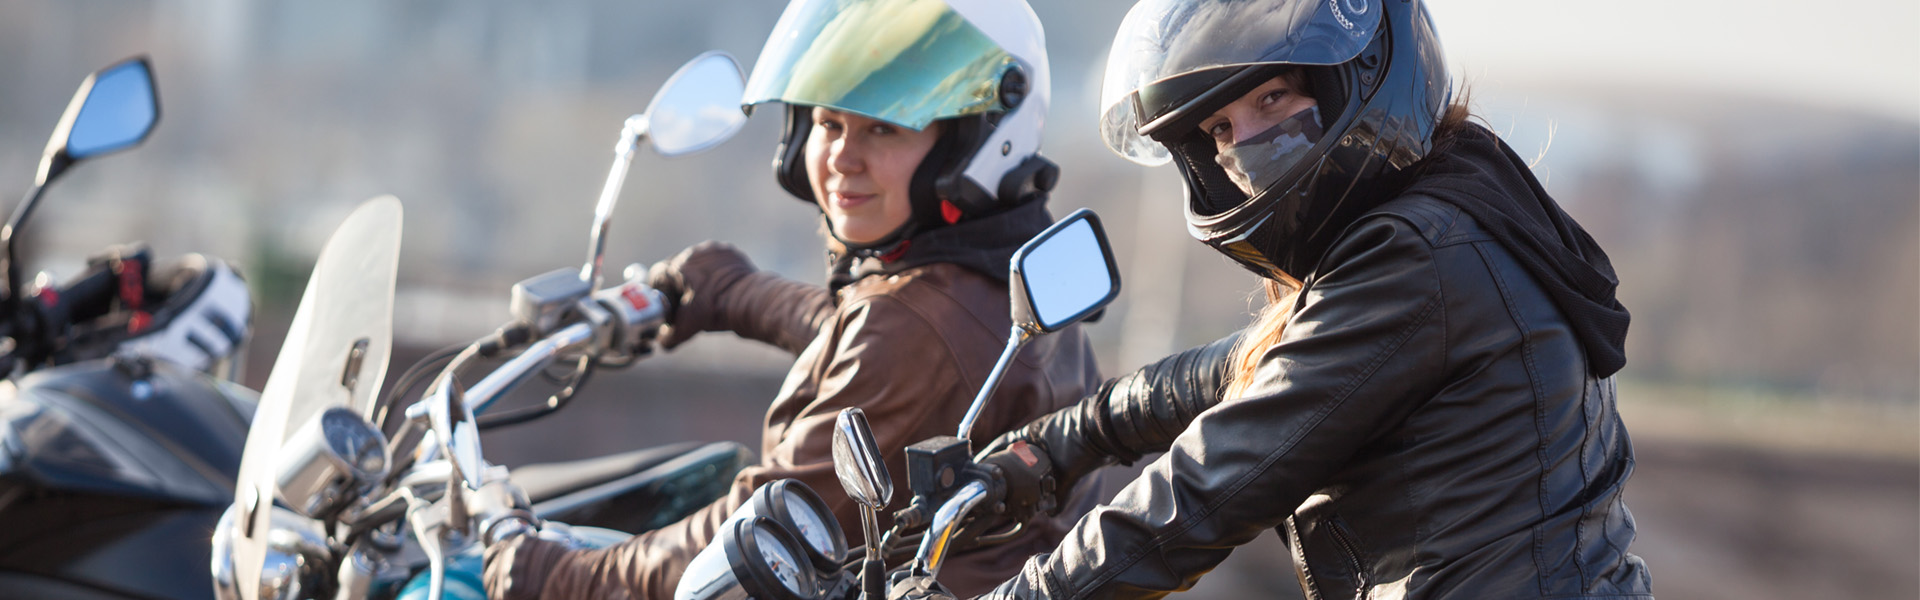 Kansas Motorcycle Accident Lawyers